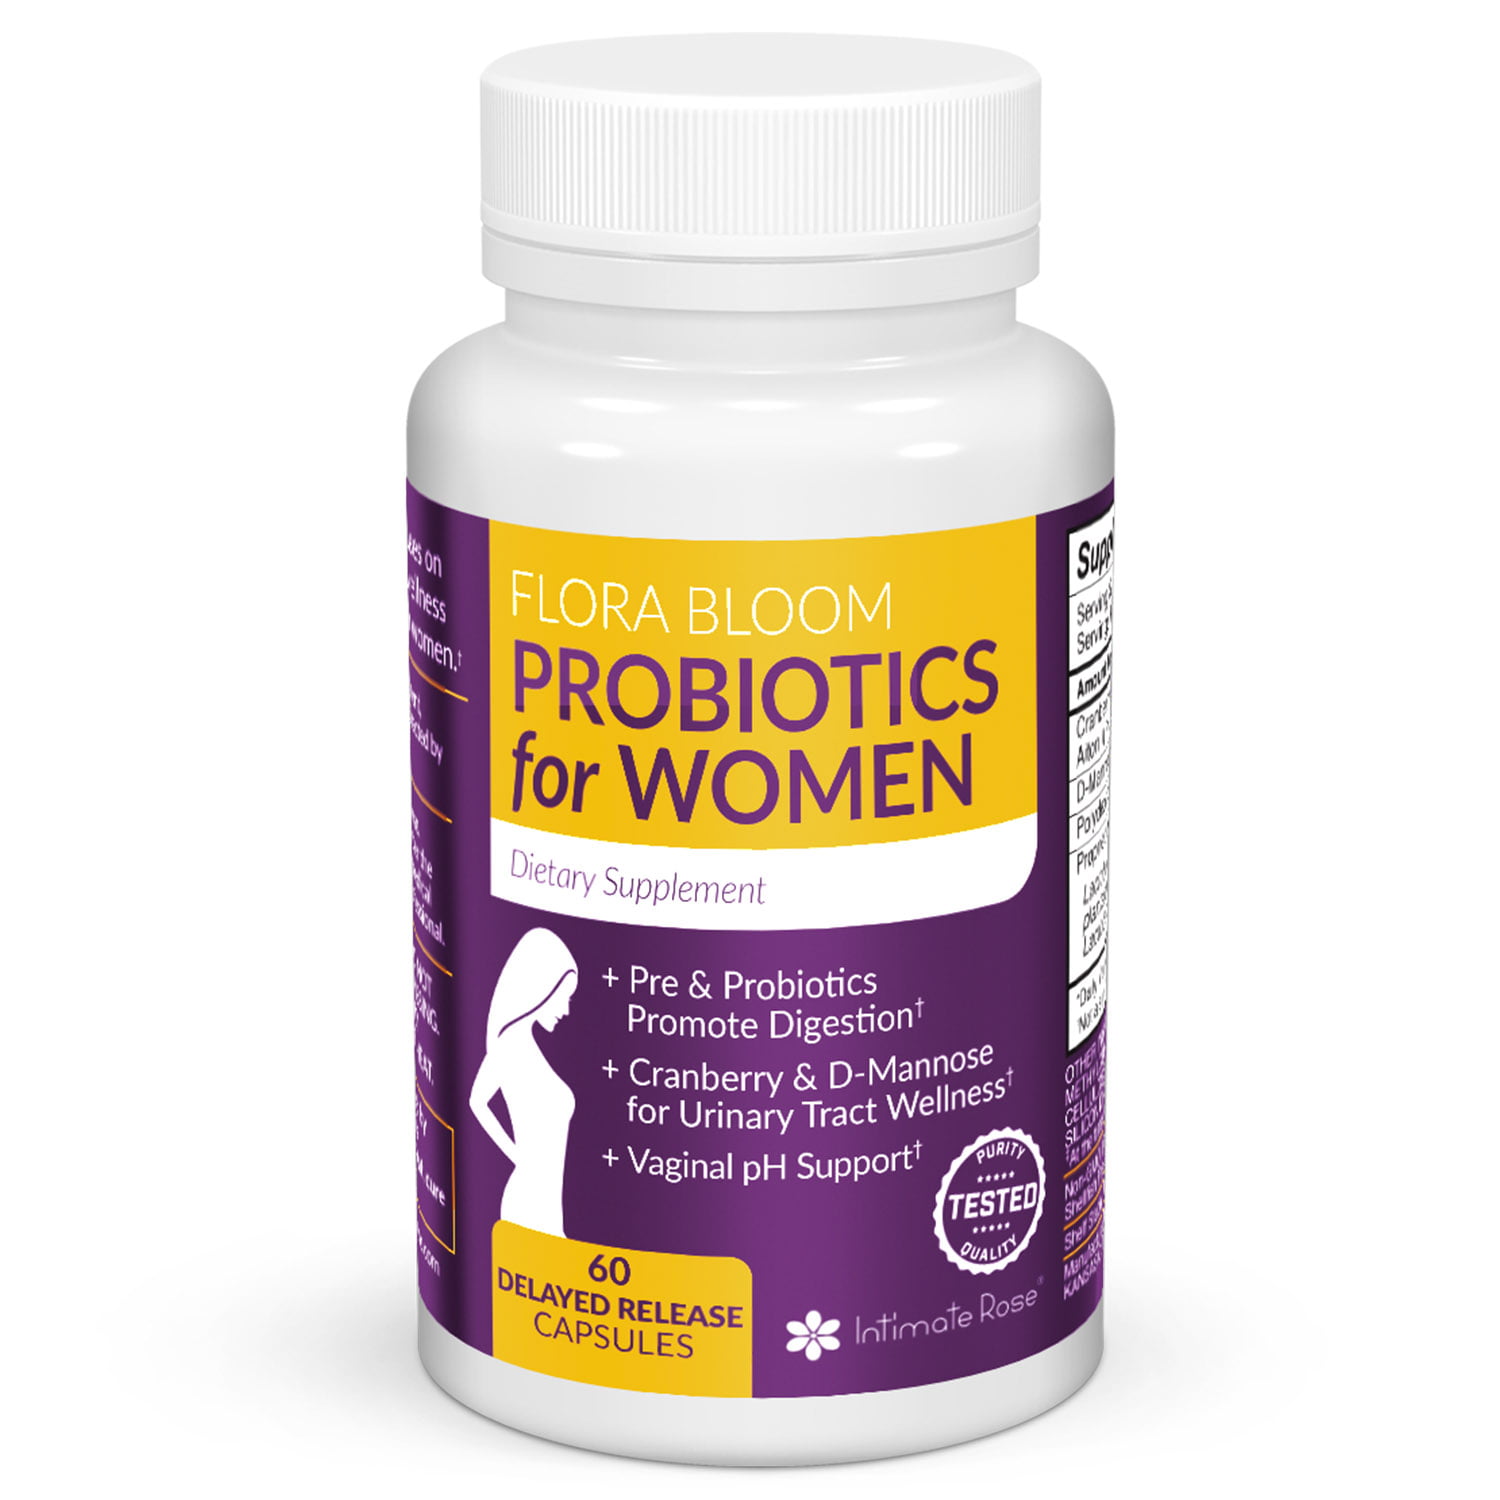 The Best Probiotic Supplements In 2019 - Reviews.com